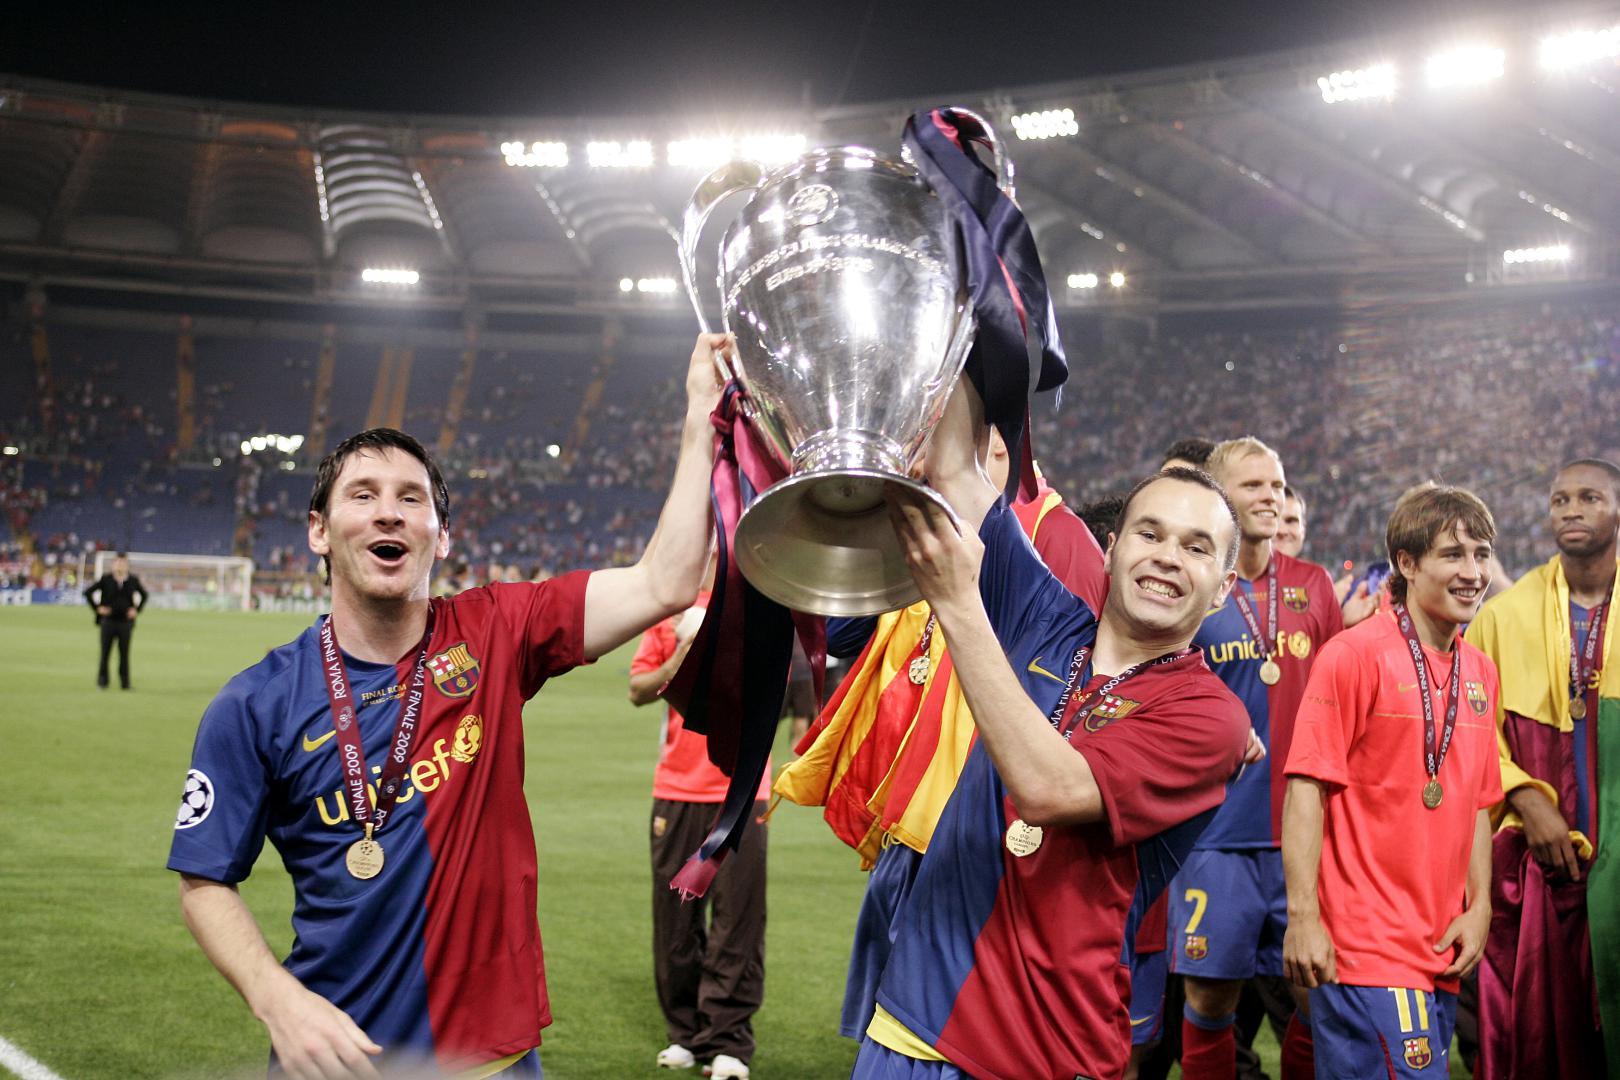 Barcelona's team players holding winning trophy and enjoying